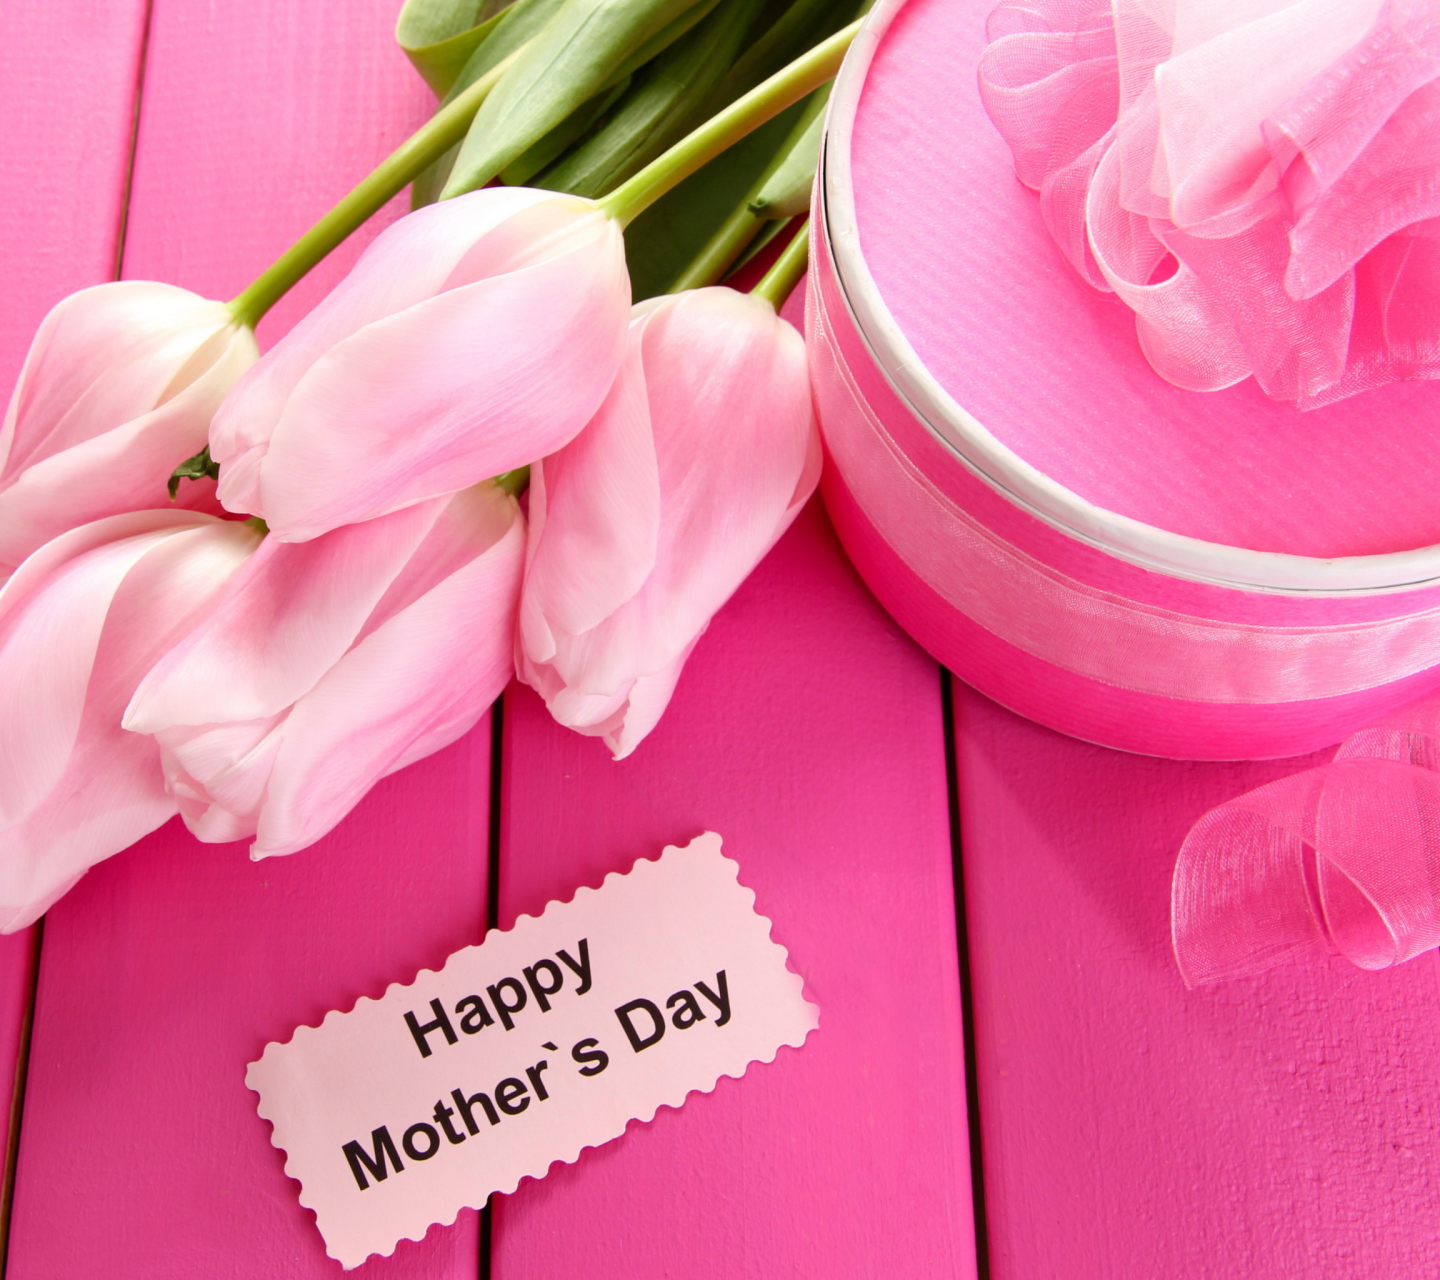 Mothers Day wallpaper 1440x1280